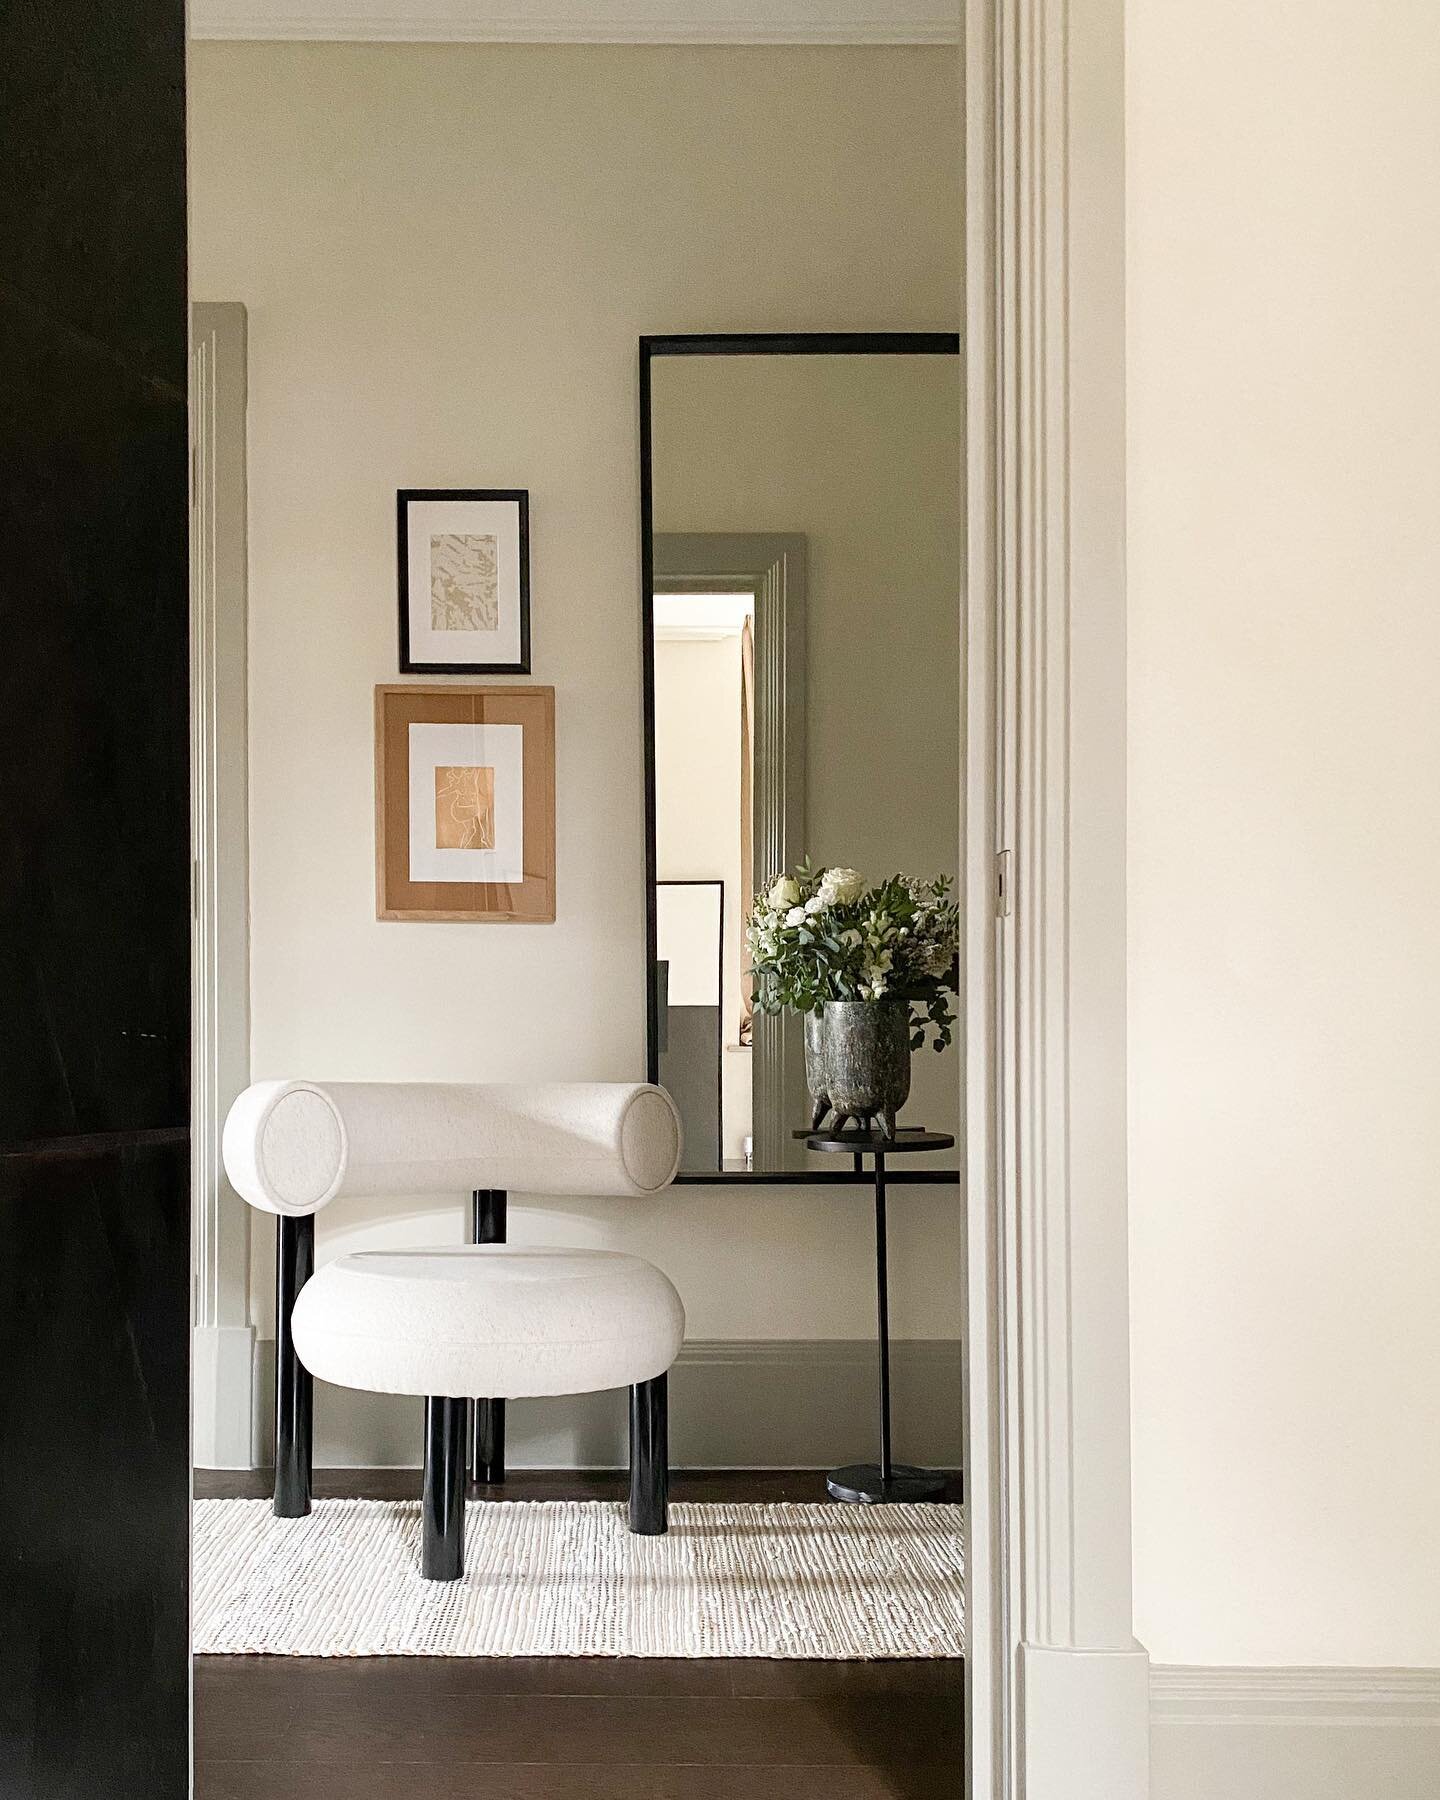 AD Our hallway was very linear and plain, until the Fat Lounge Chair by @tomdixonstudio from @heals_furniture arrived to welcome guests into our home! This beauty is upholstered in an off white woollen fabric and brings me so much visual joy! ⠀
⠀
If 